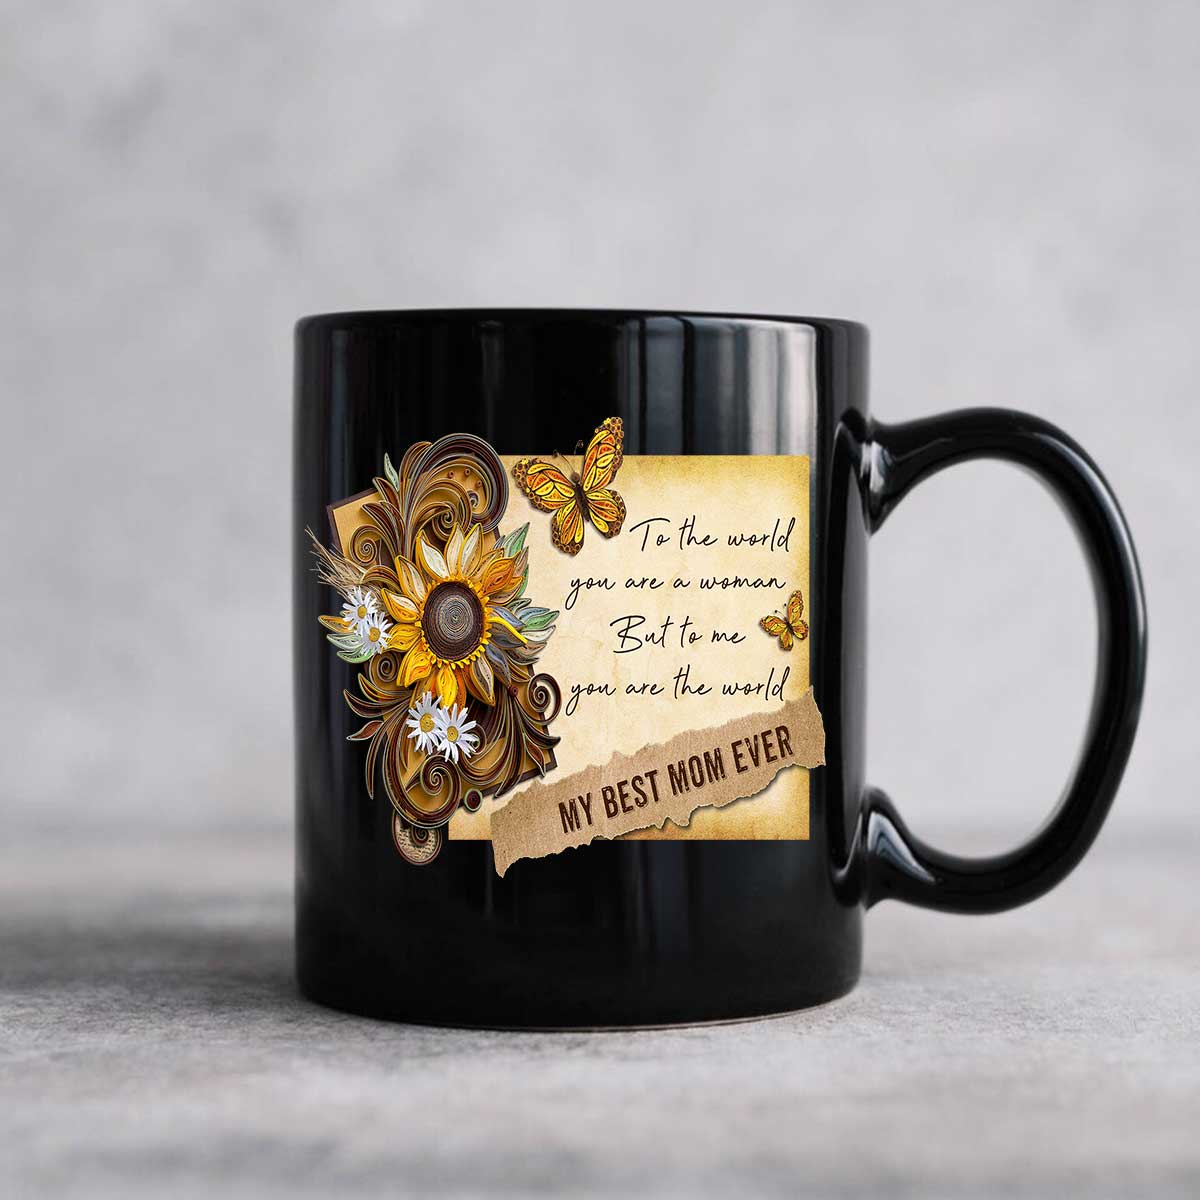 Gift For Mom Mug - Daughter to mom, My best mom ever Mug, Beautiful letter, Pretty butterfly Mug - Gift For Mother's Day, Presents for Mom